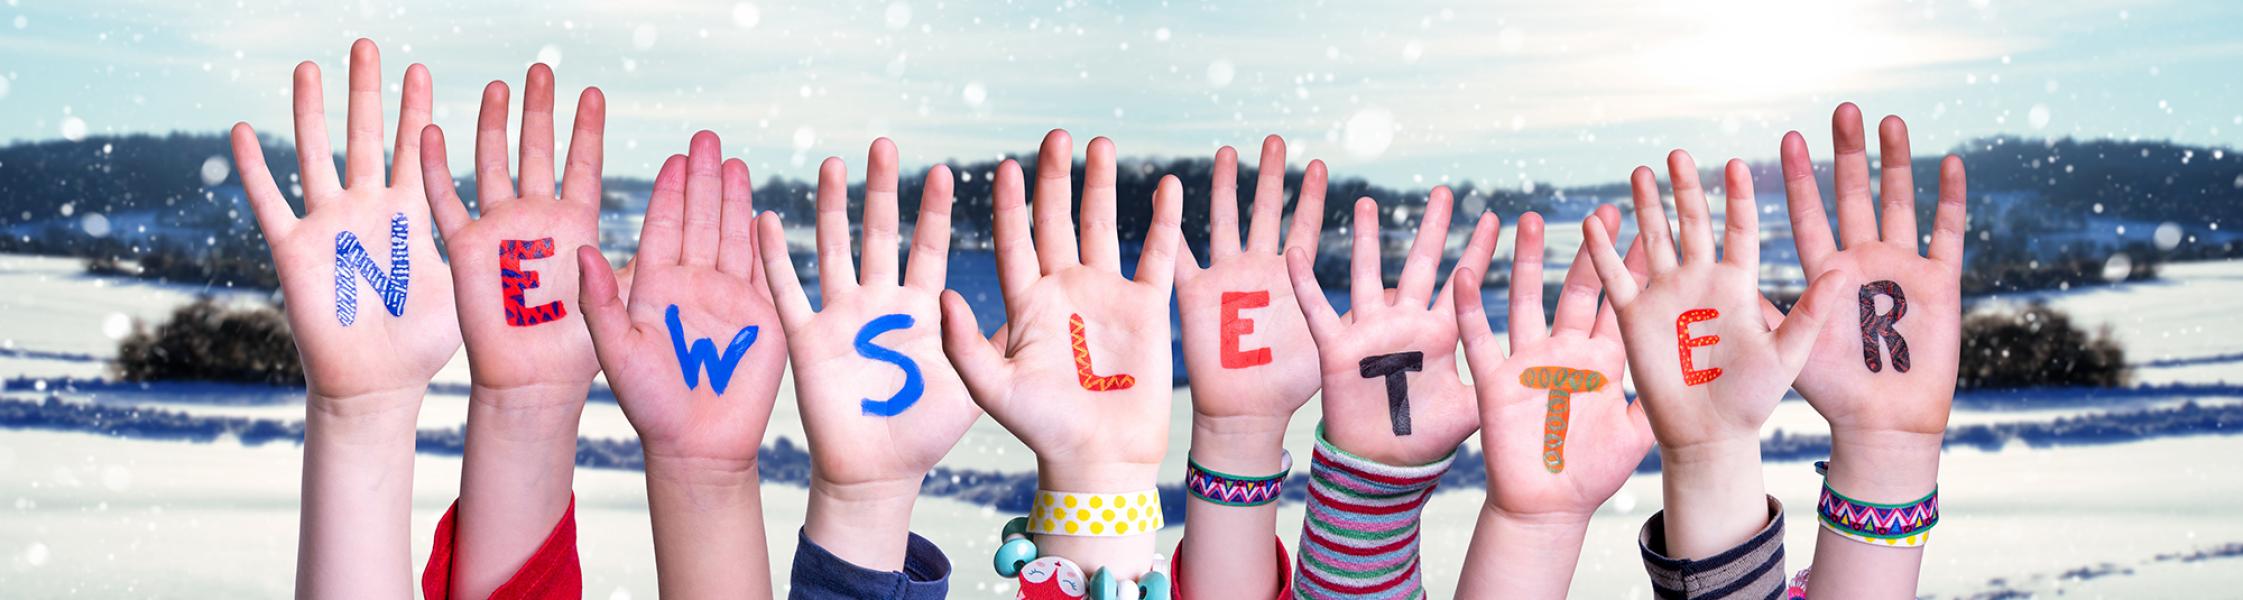 And image of children's hands in the air against a winter background, with the word, "Newsletter" spelled out letter by letter in primary colours on the palm of each hand.